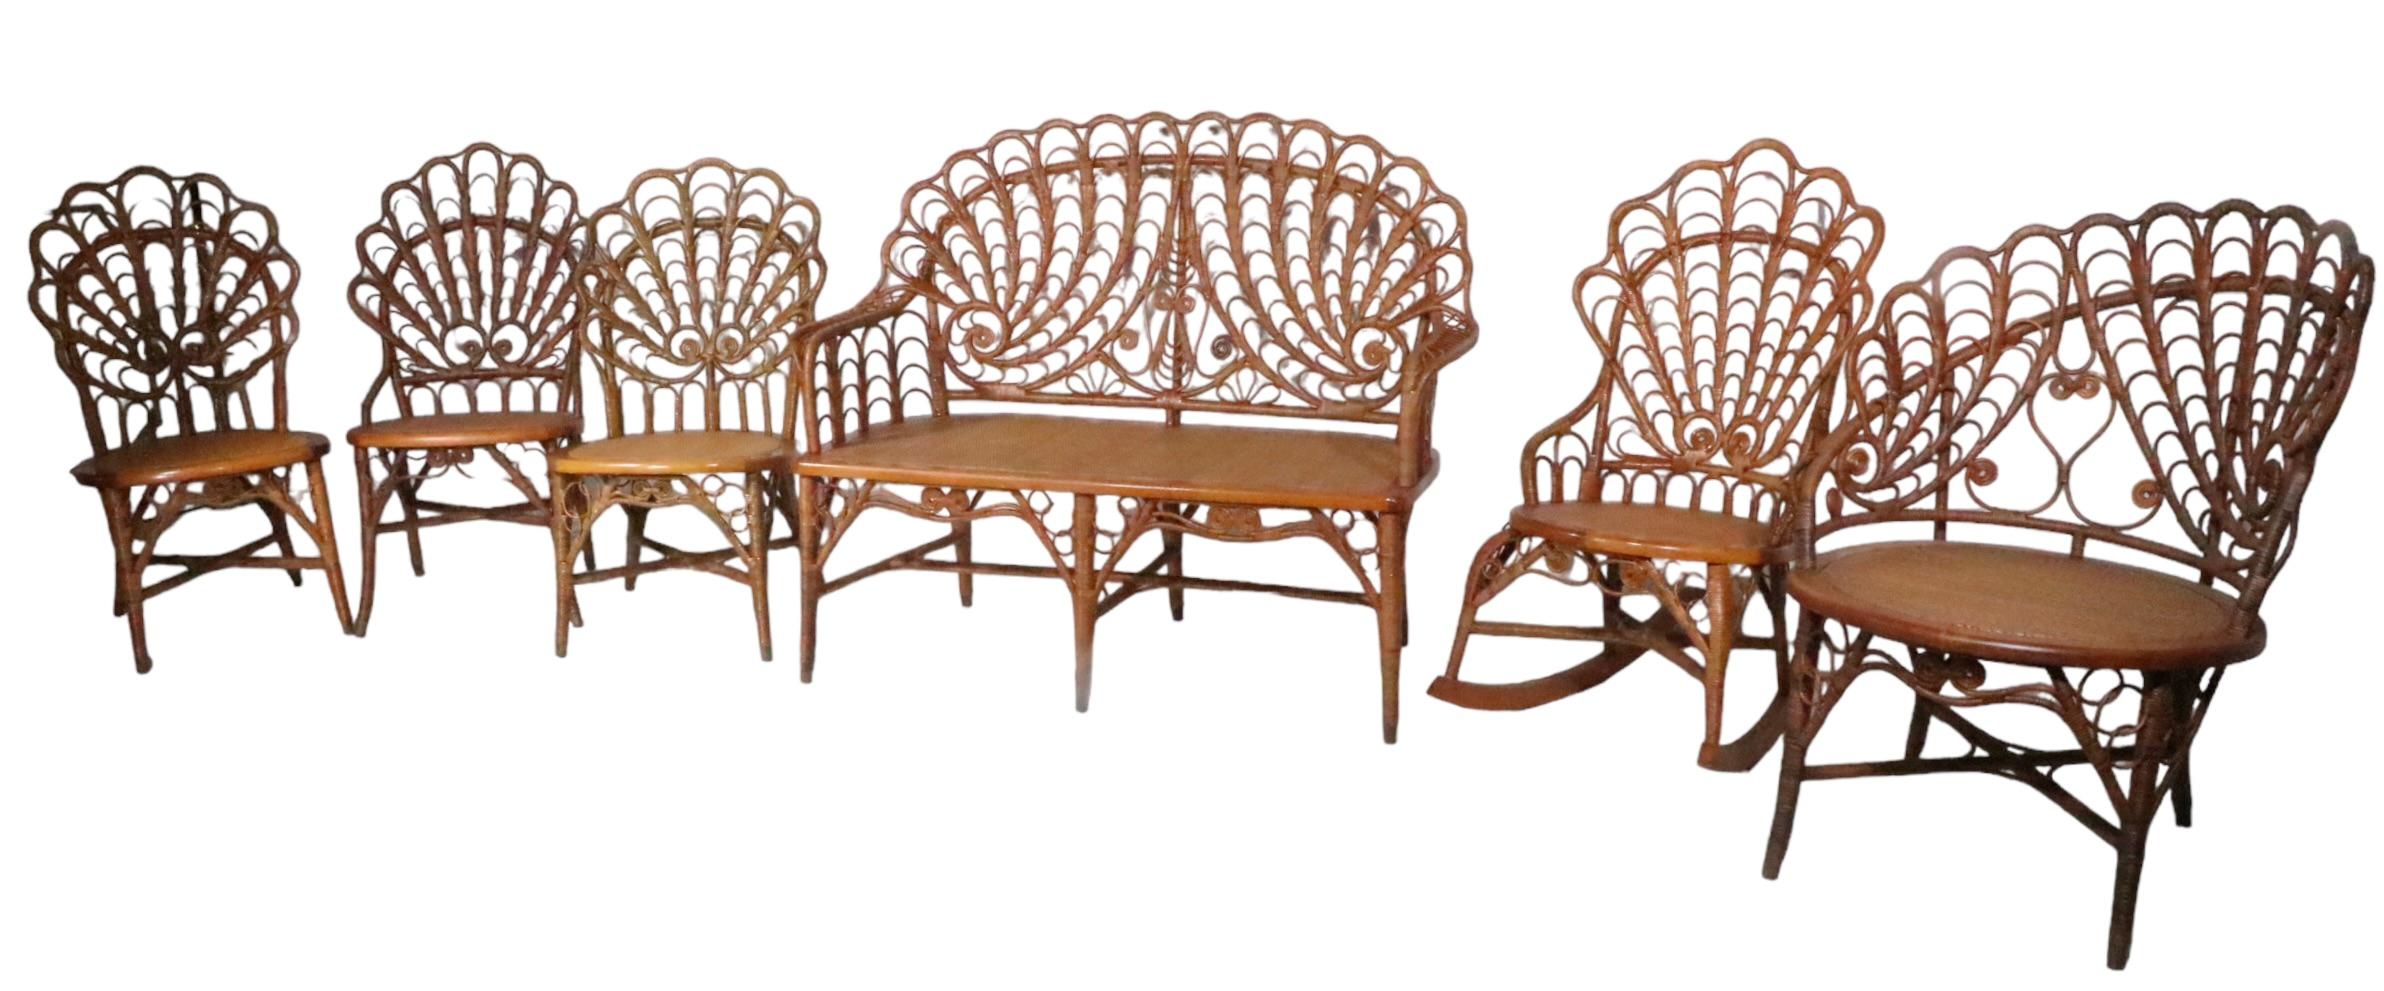 6 Pc. Set Ornate Antique Wicker by Heywood Brothers c 1890's  For Sale 1